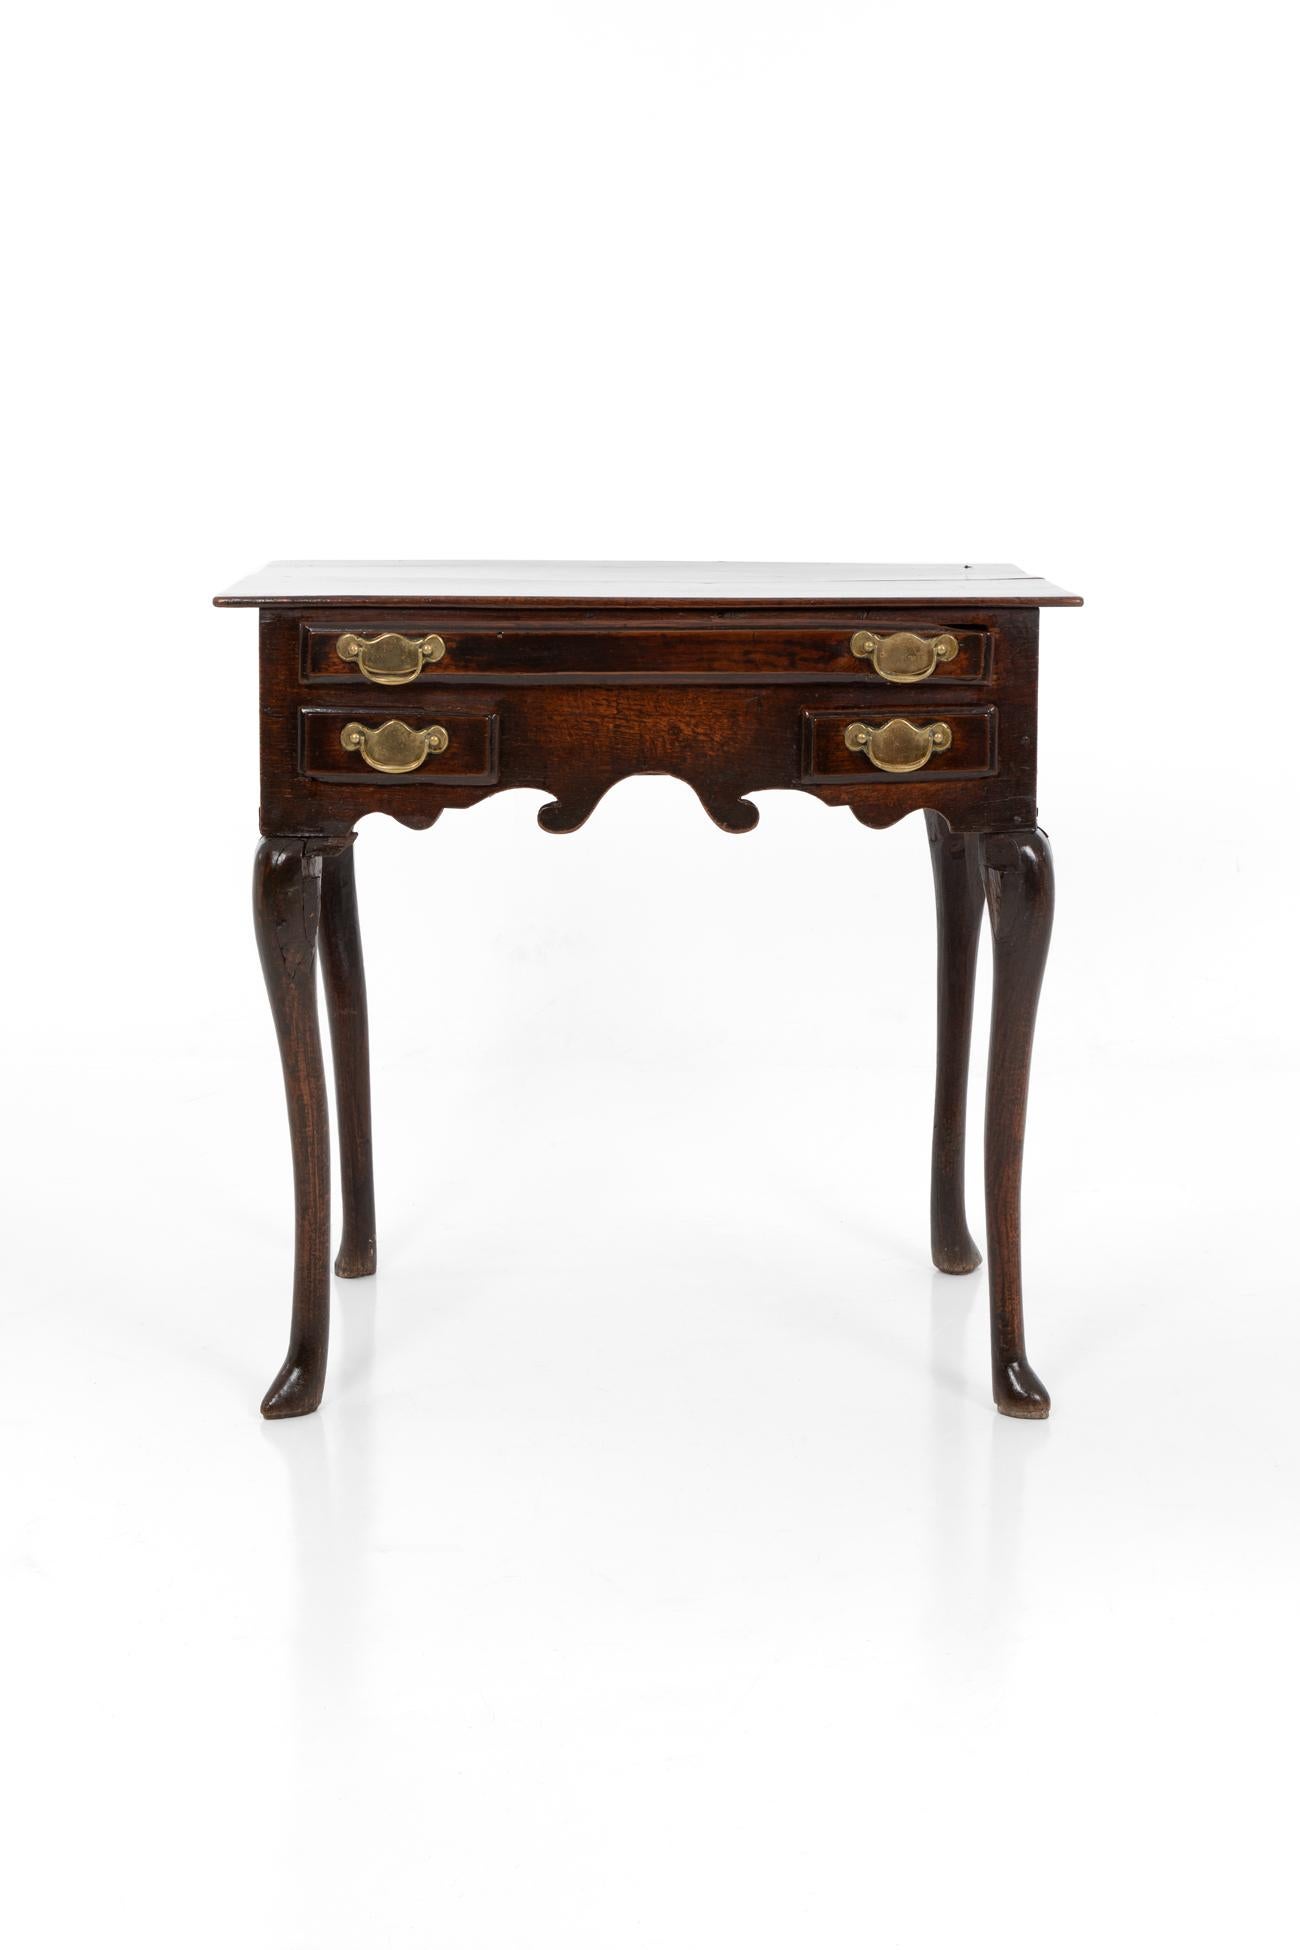 A George II country oak lowboy with a moulded rectangular two plank top. Single frieze drawer over two short drawers, with brass drop handles on pierced back plates. Shaped apron on slender cabriole legs on trifid feet.
English, circa